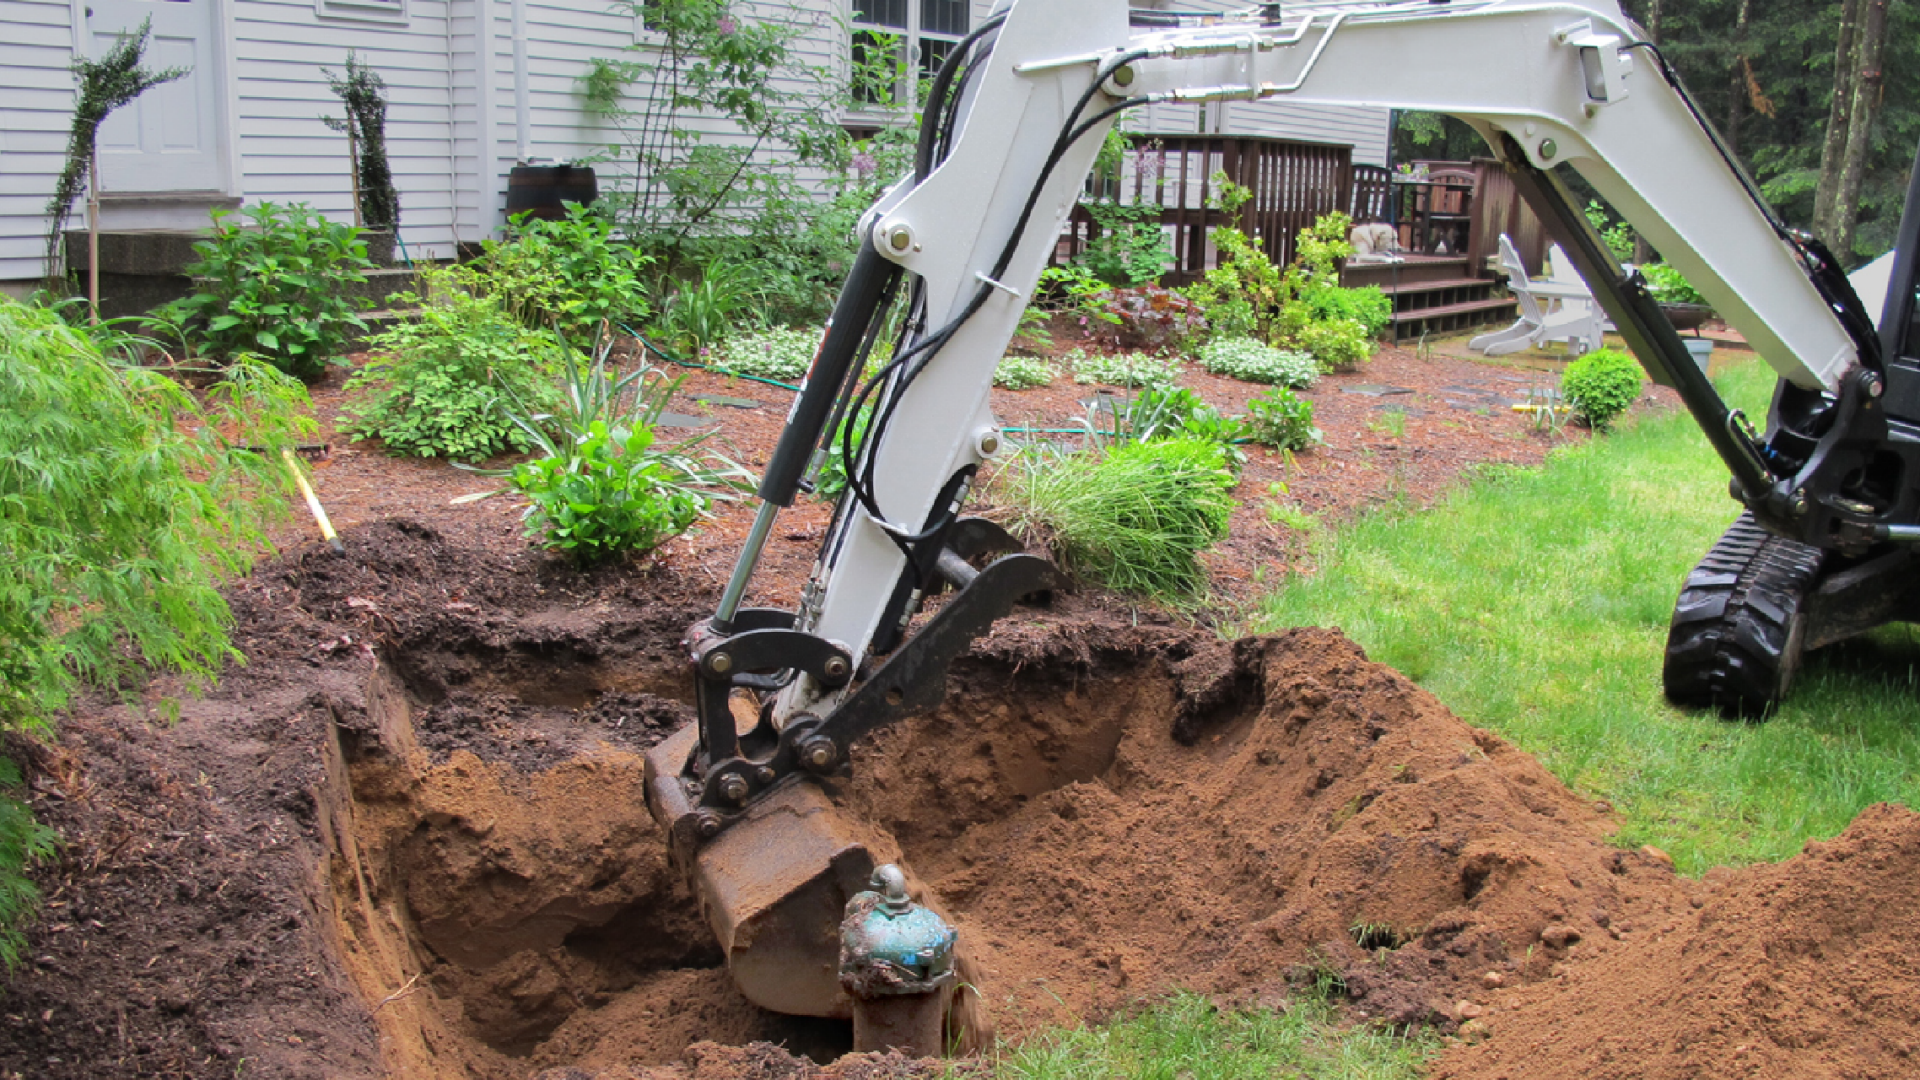 A home yard excavation to repair a service line